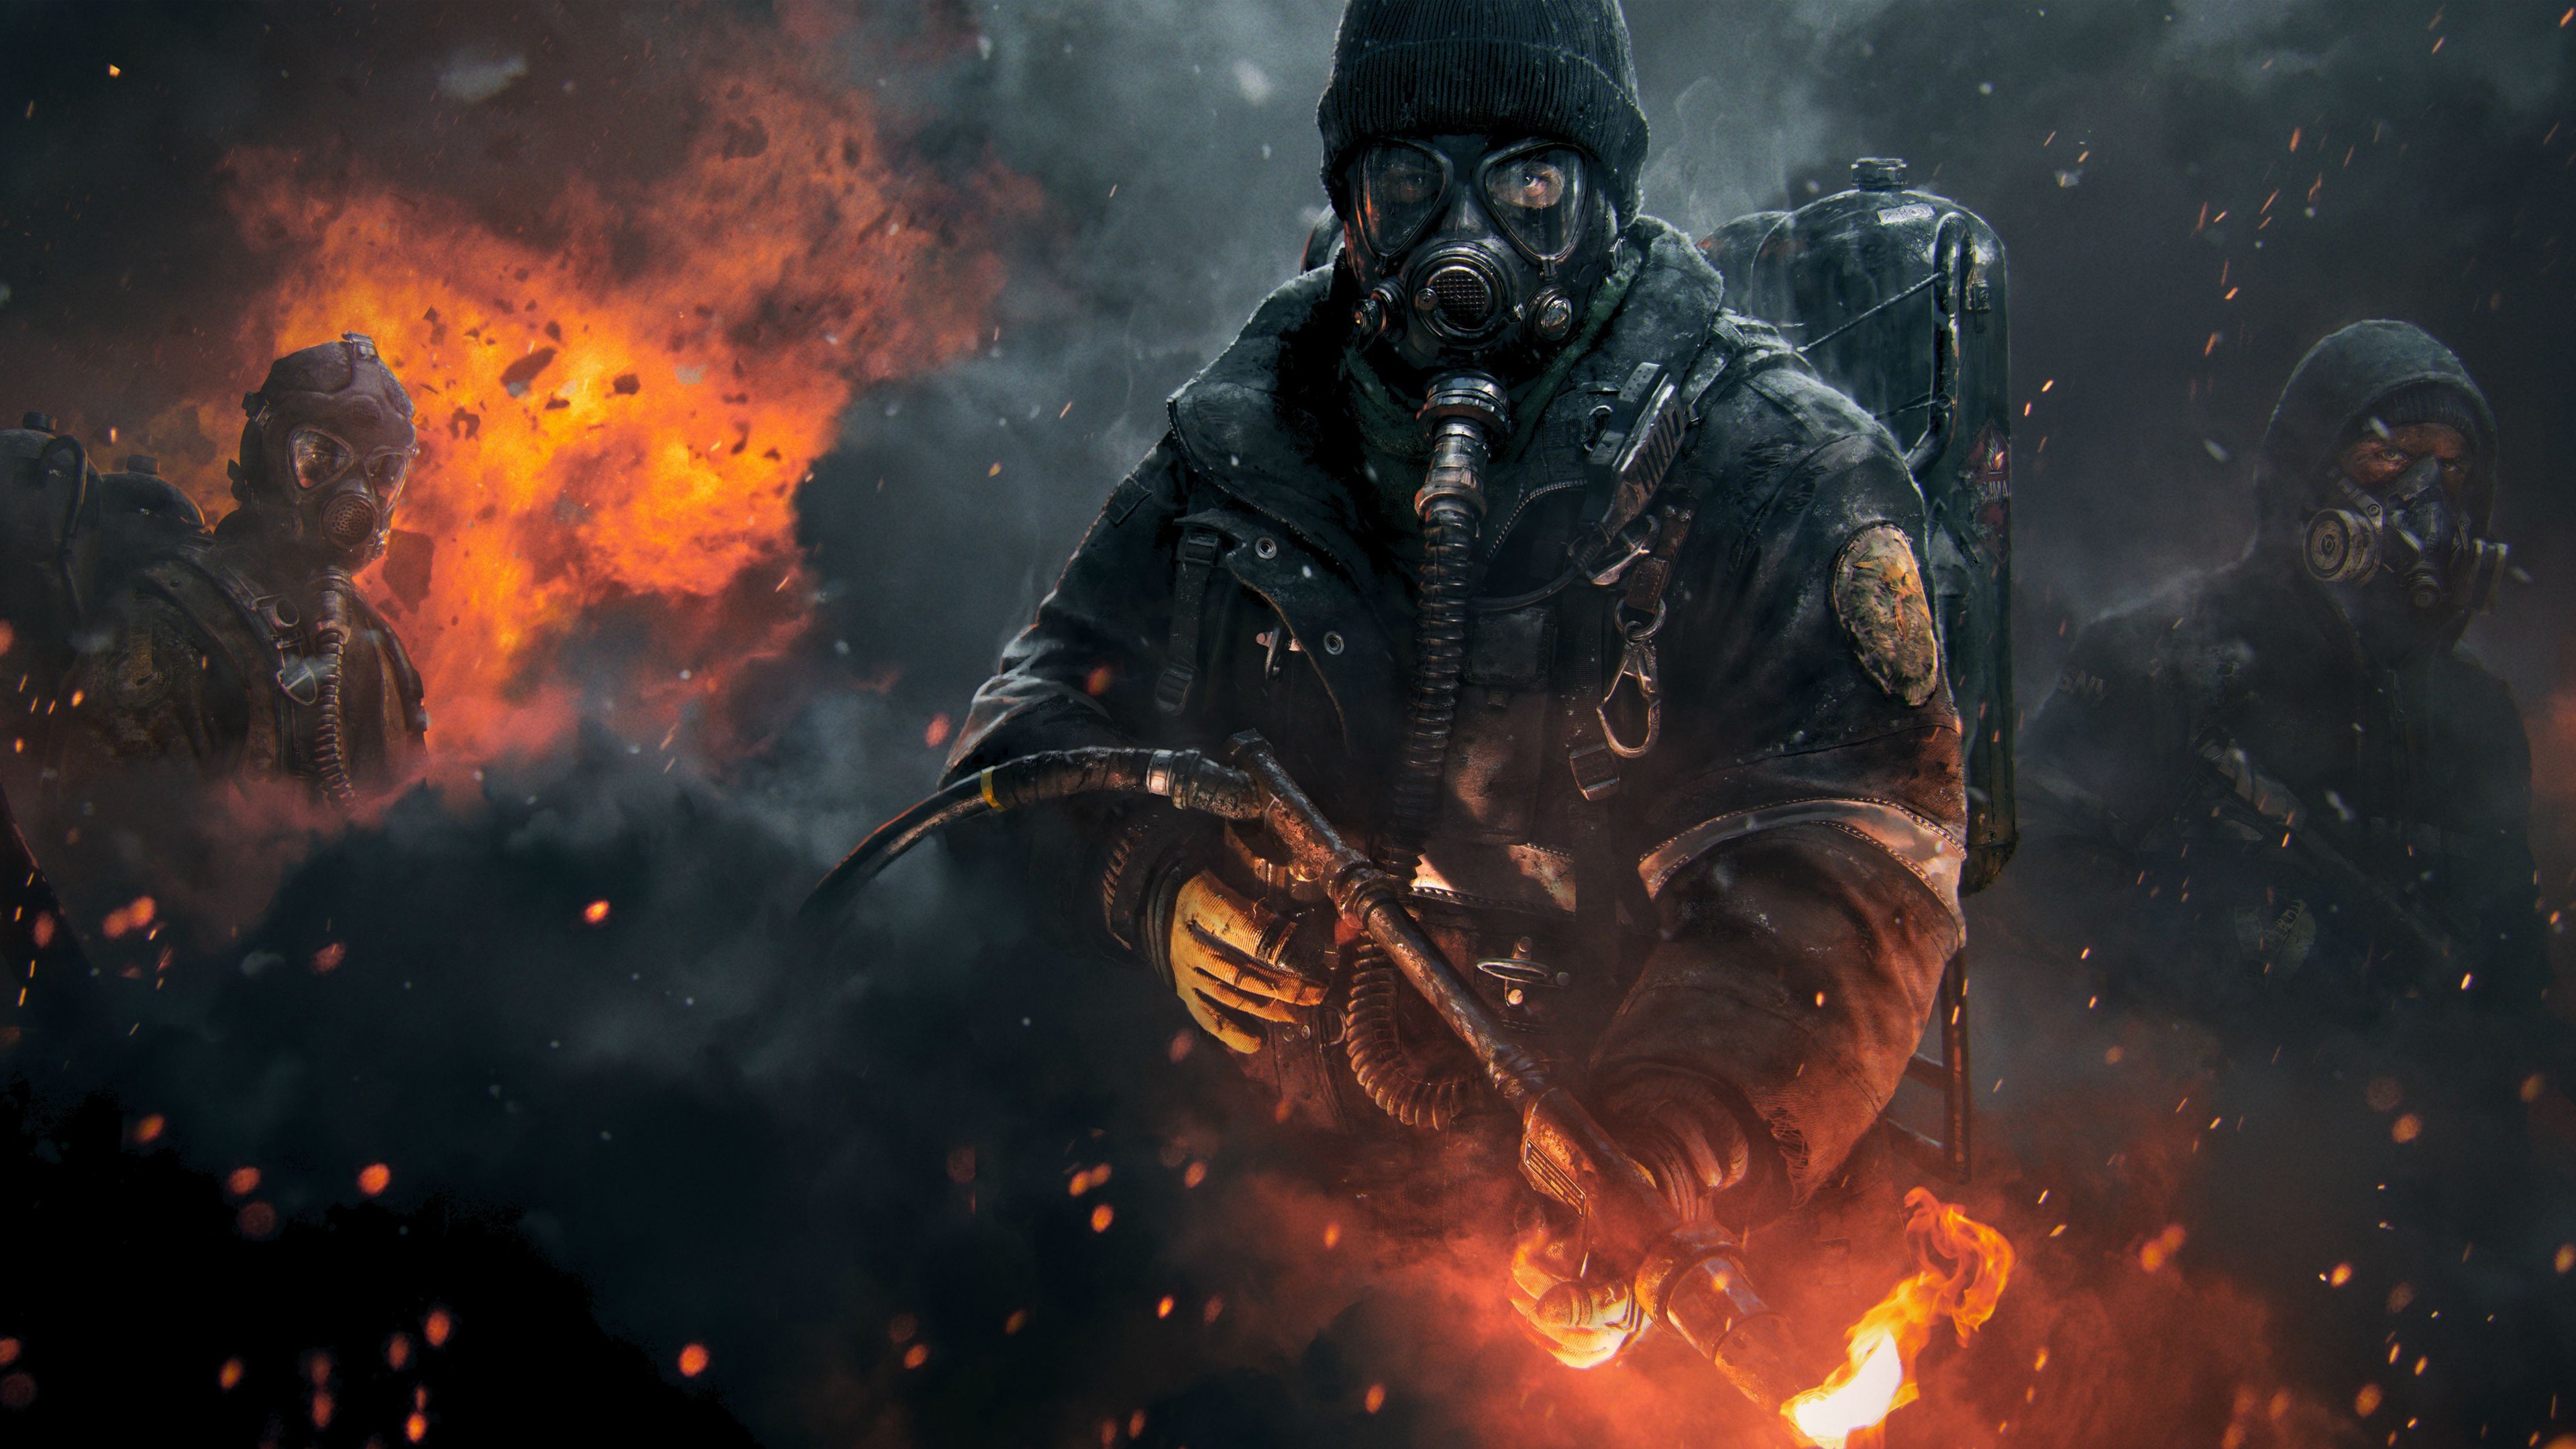 tom_clancys_the_division-3840x2160.jpg